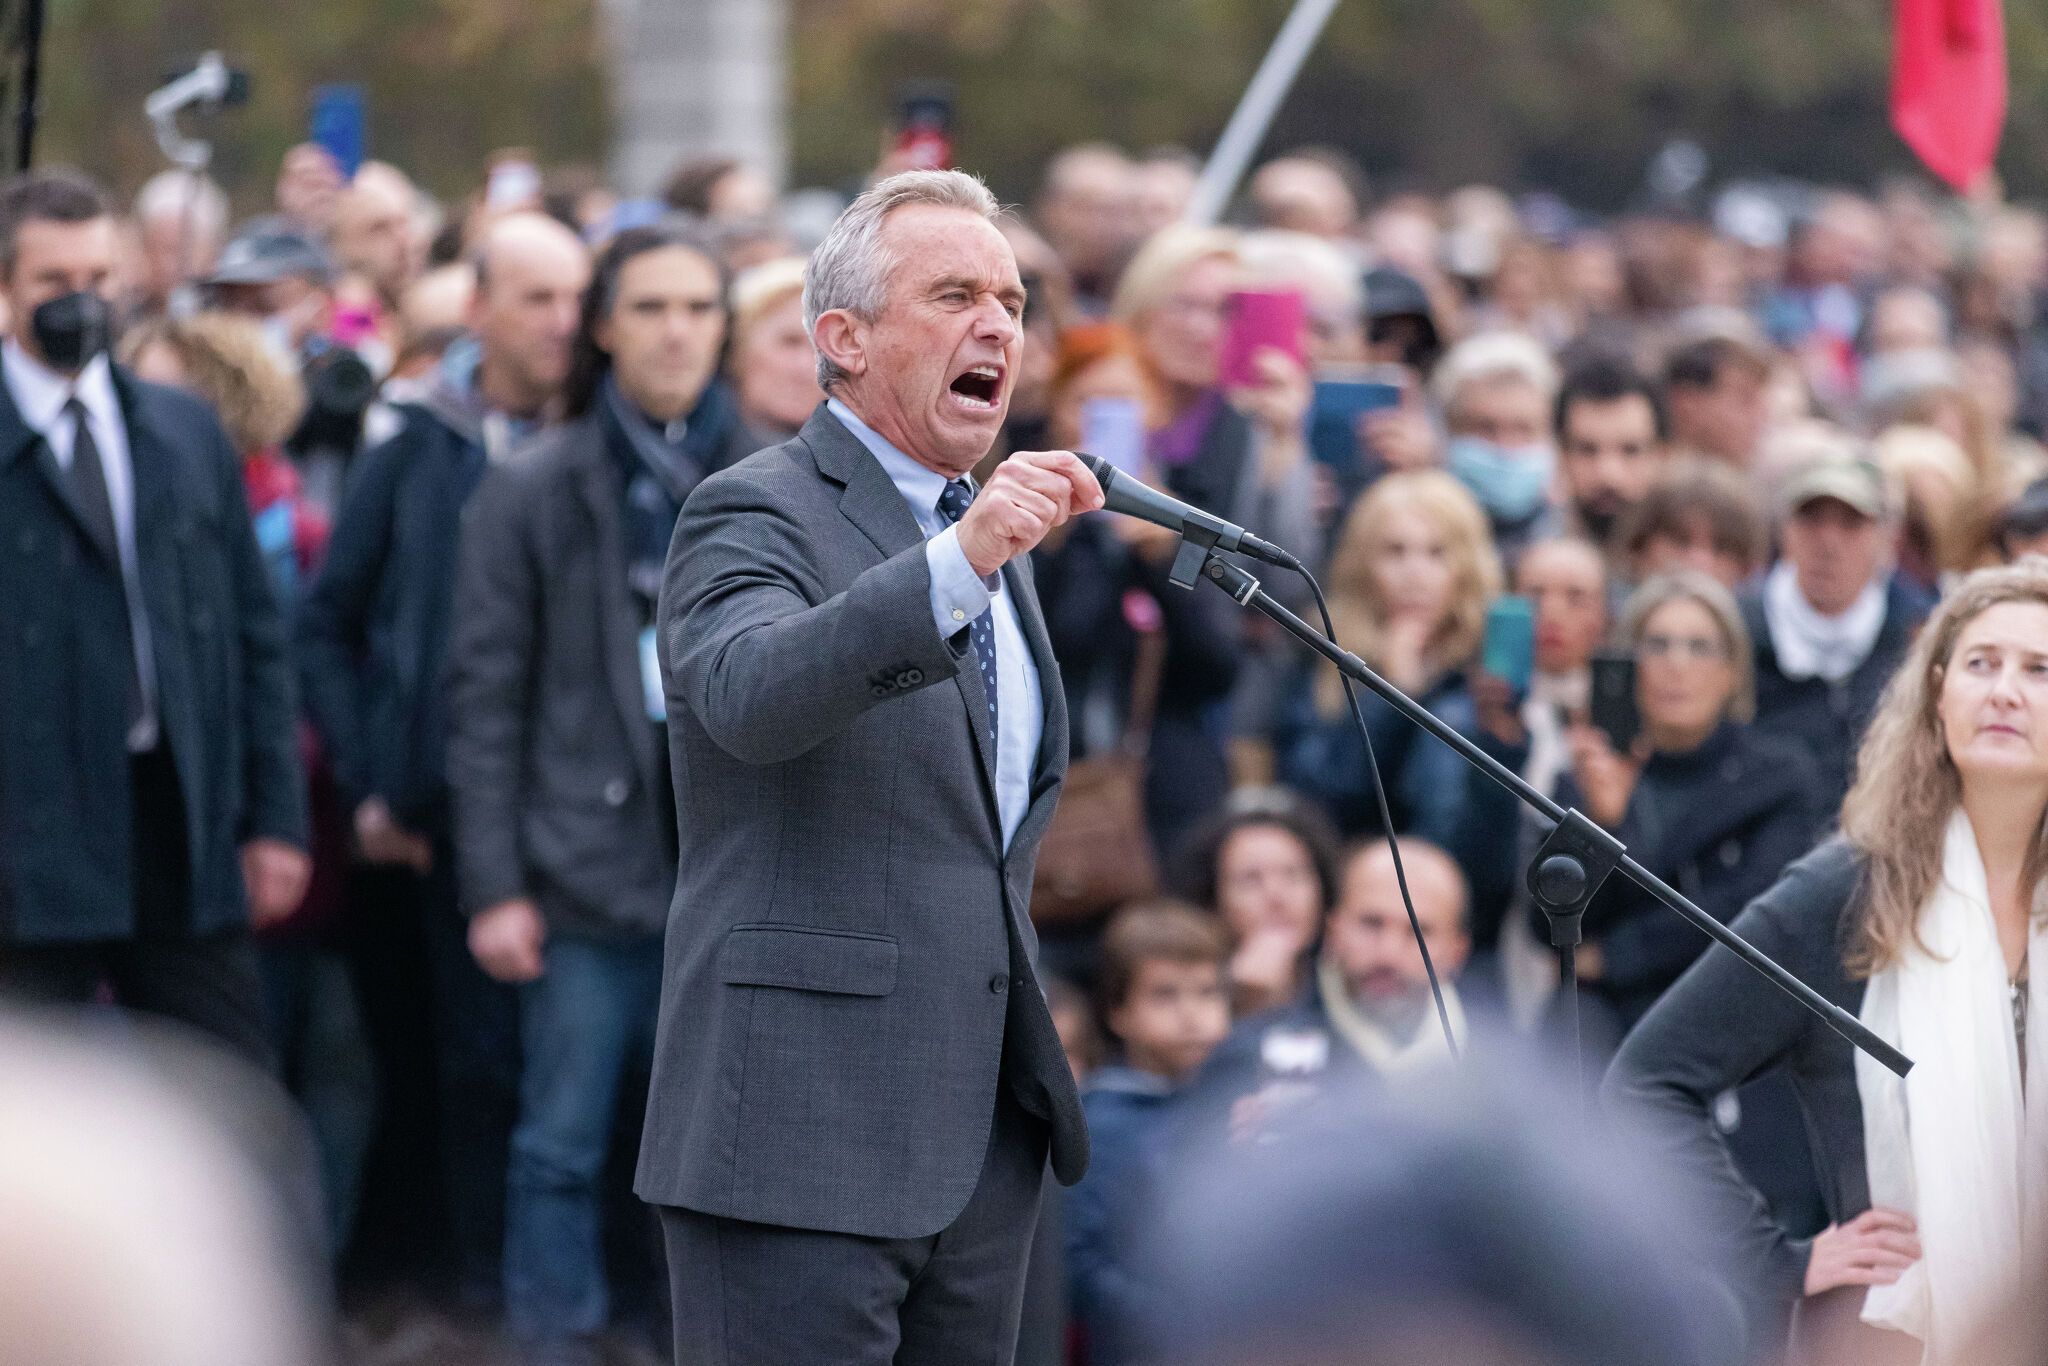 Robert F. Kennedy Jr. officially announces presidential candidacy